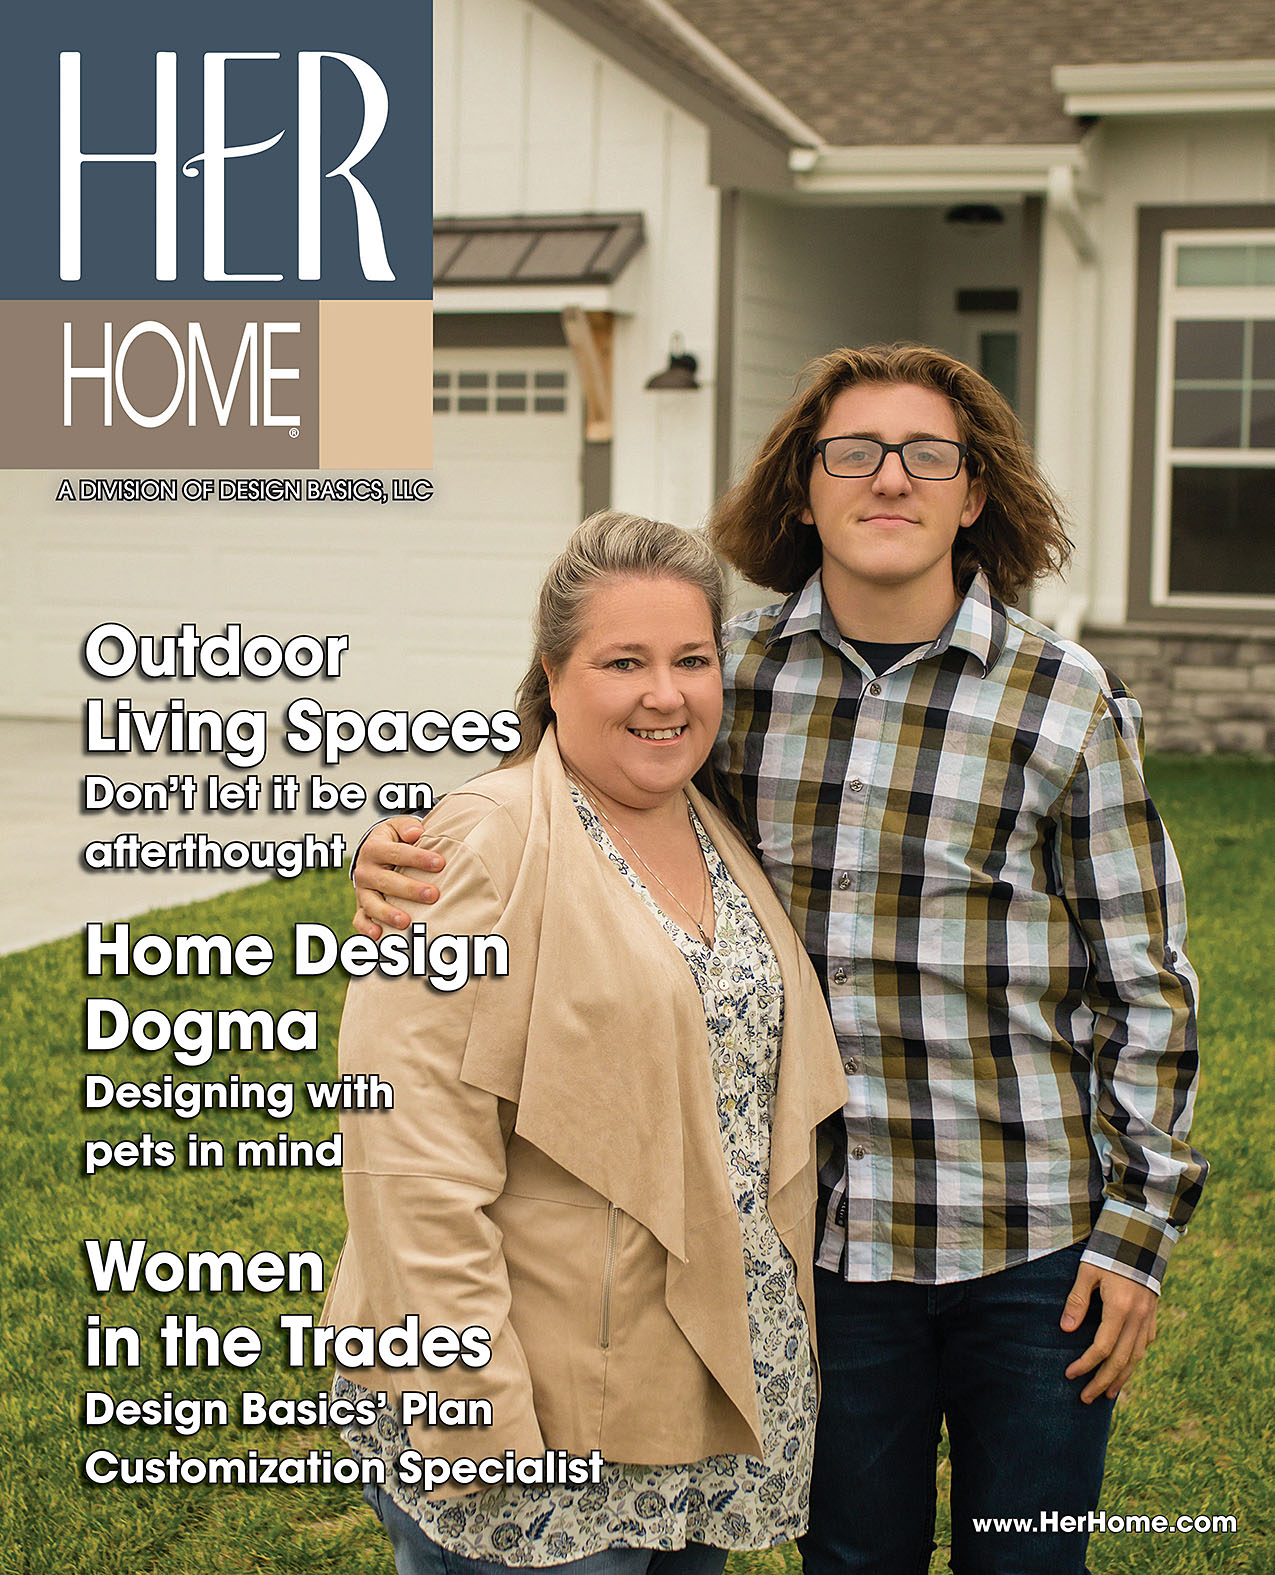 Her Home™ Magazine for 2021 - Building & Remodeling Insights